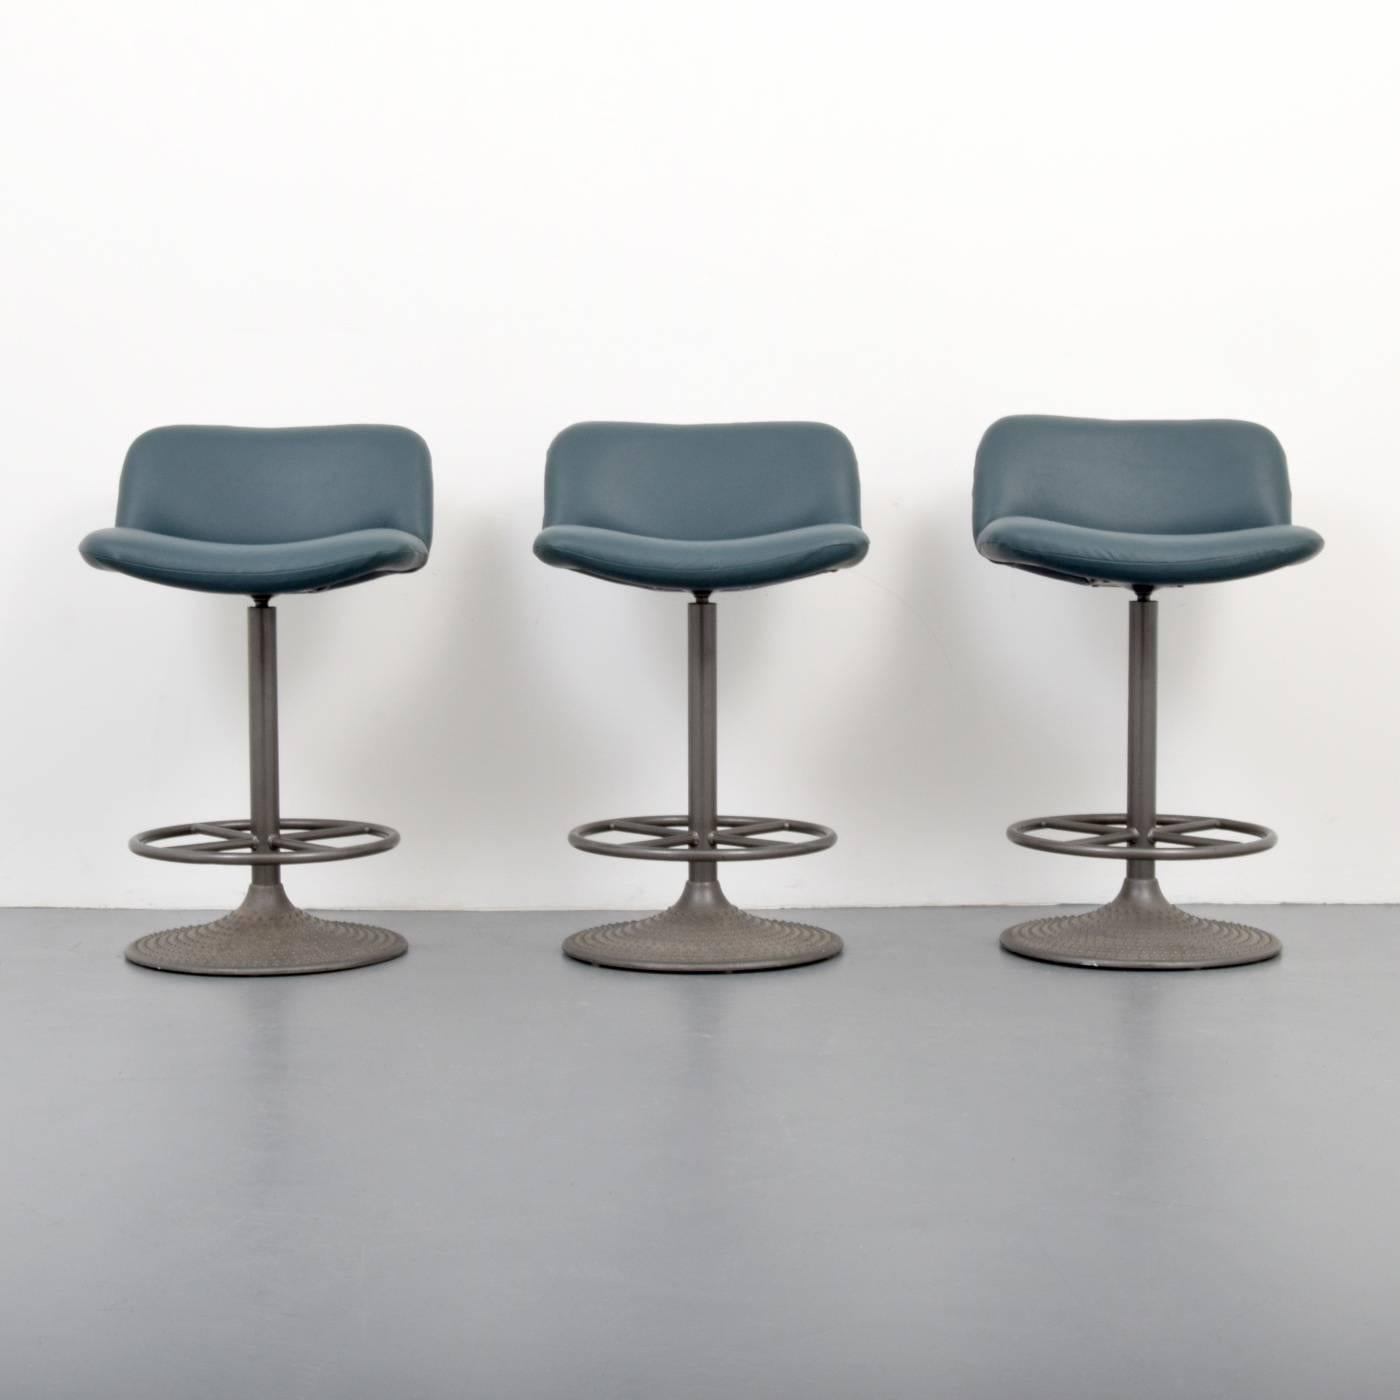 Caribe stools by Ilmari Tapiovaara for ICF. Reference: Furniture 2000- Modern Classics and New Designs in Production, Leslie Piña, pg. 142.

Markings: ICF label.
 